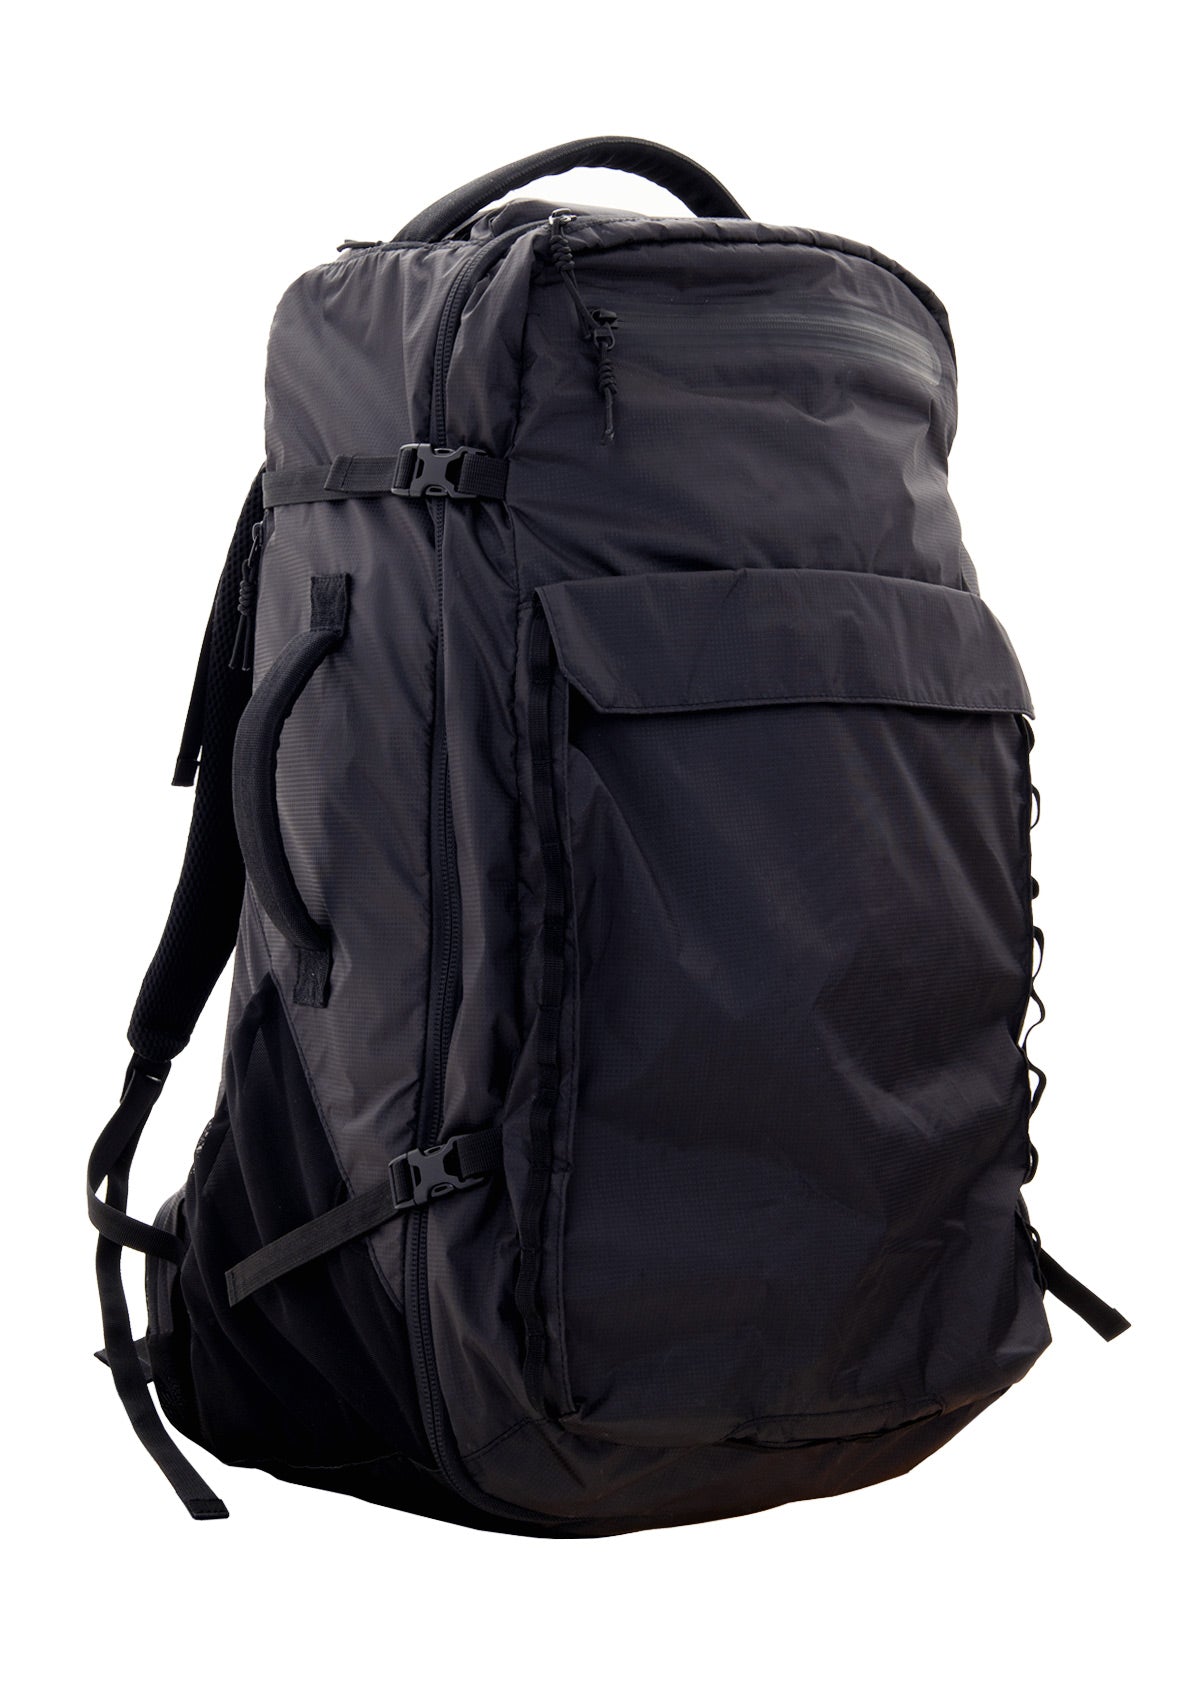 60 Litre Expedition Pack